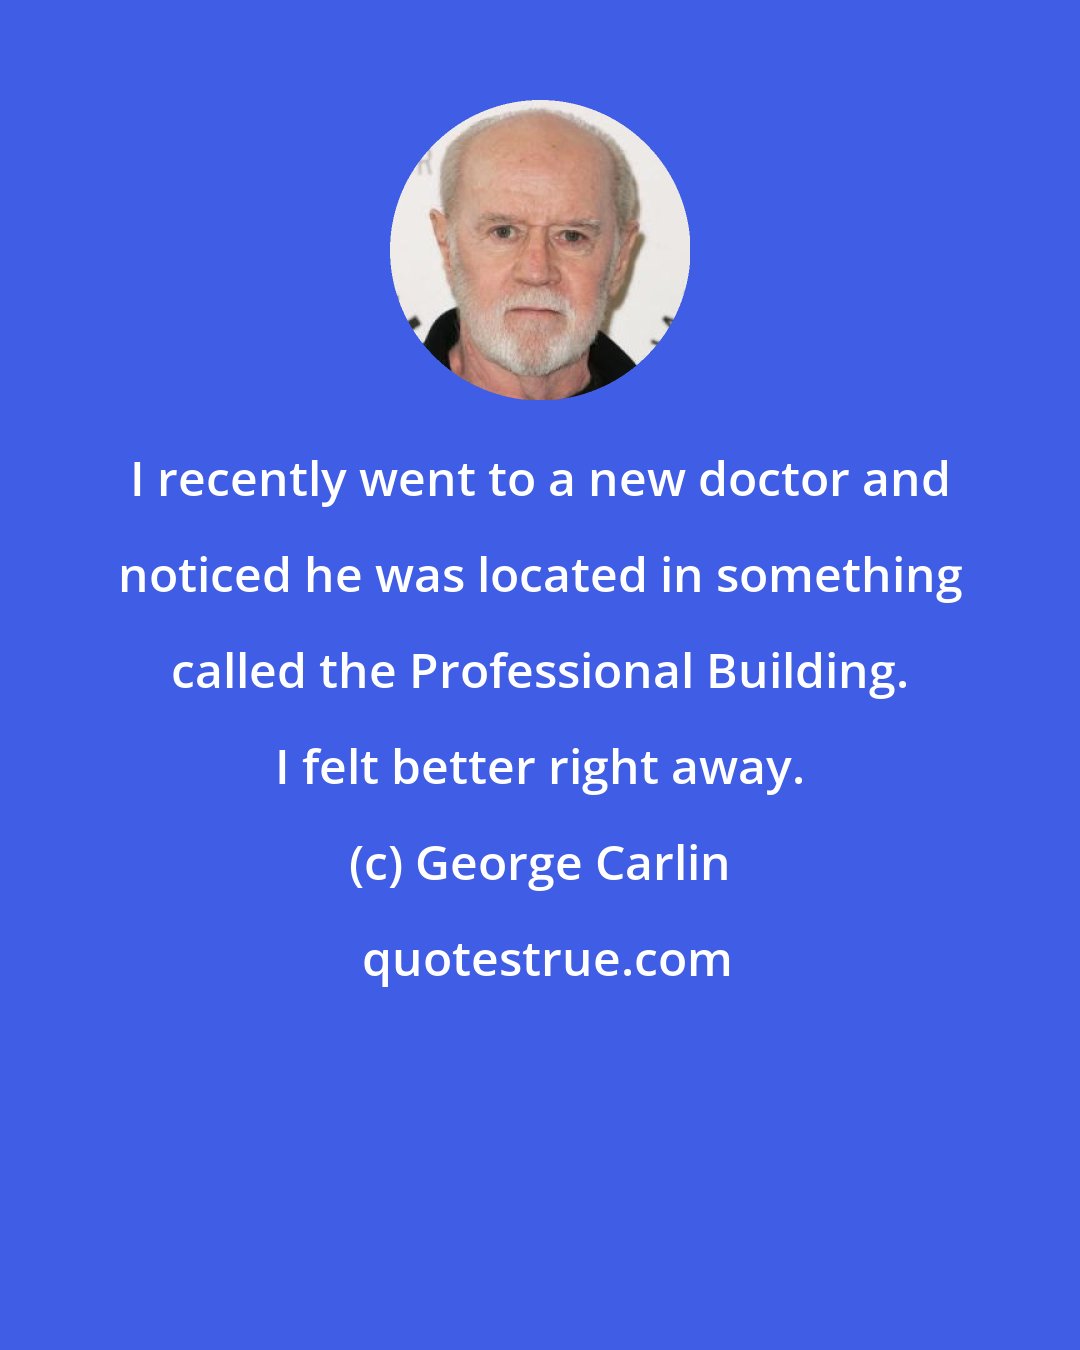 George Carlin: I recently went to a new doctor and noticed he was located in something called the Professional Building. I felt better right away.